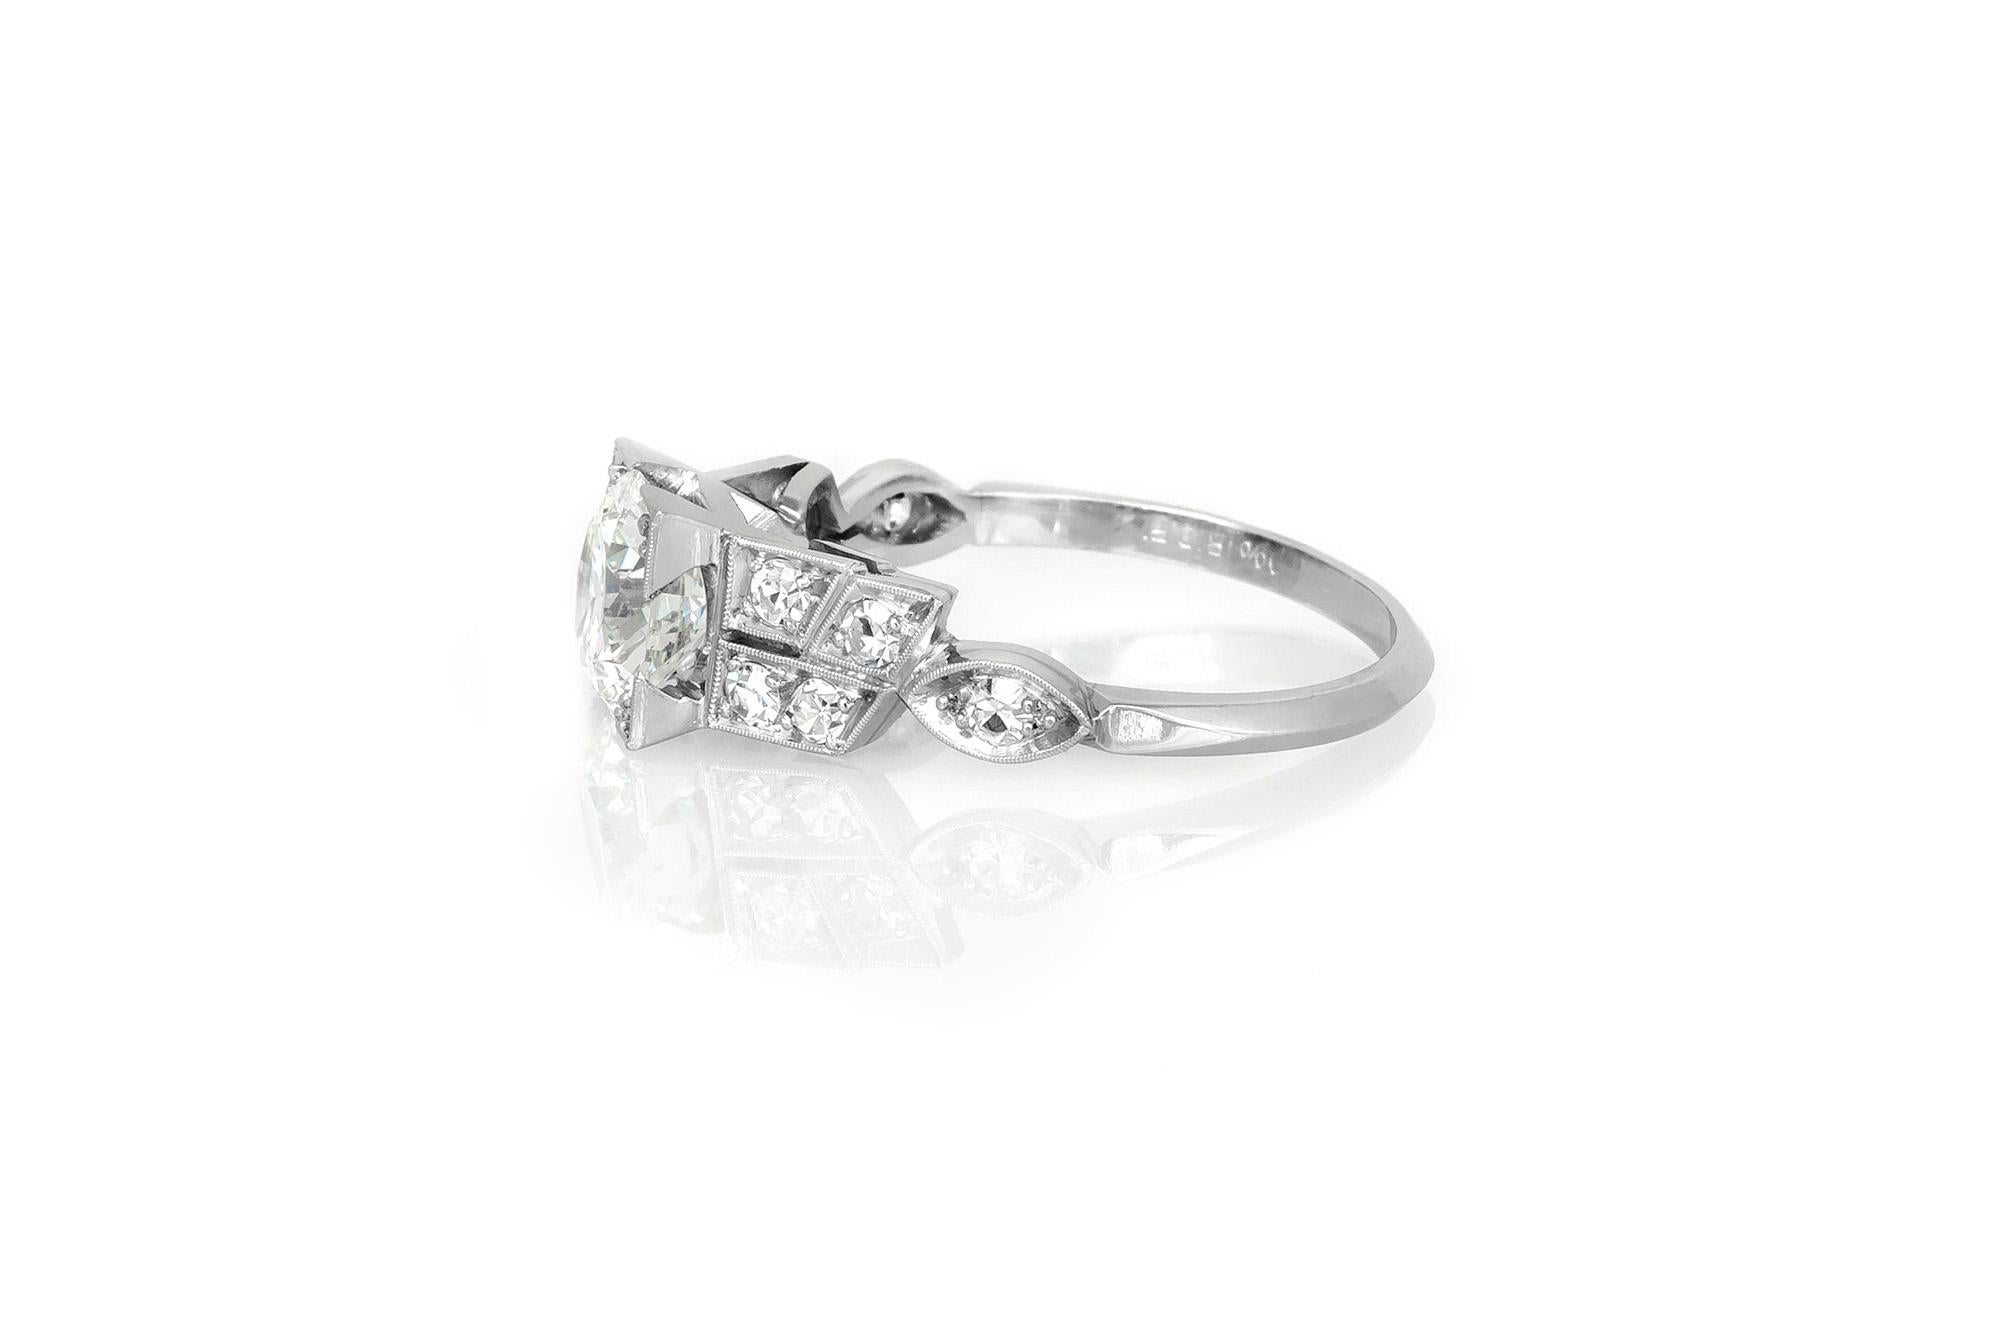 The beautiful engagement ring is finely crafted in platinum with center diamond weighing approximately 1.00 carat and around diamonds weighing approimately total of 1.00 carat.
Circa 1930